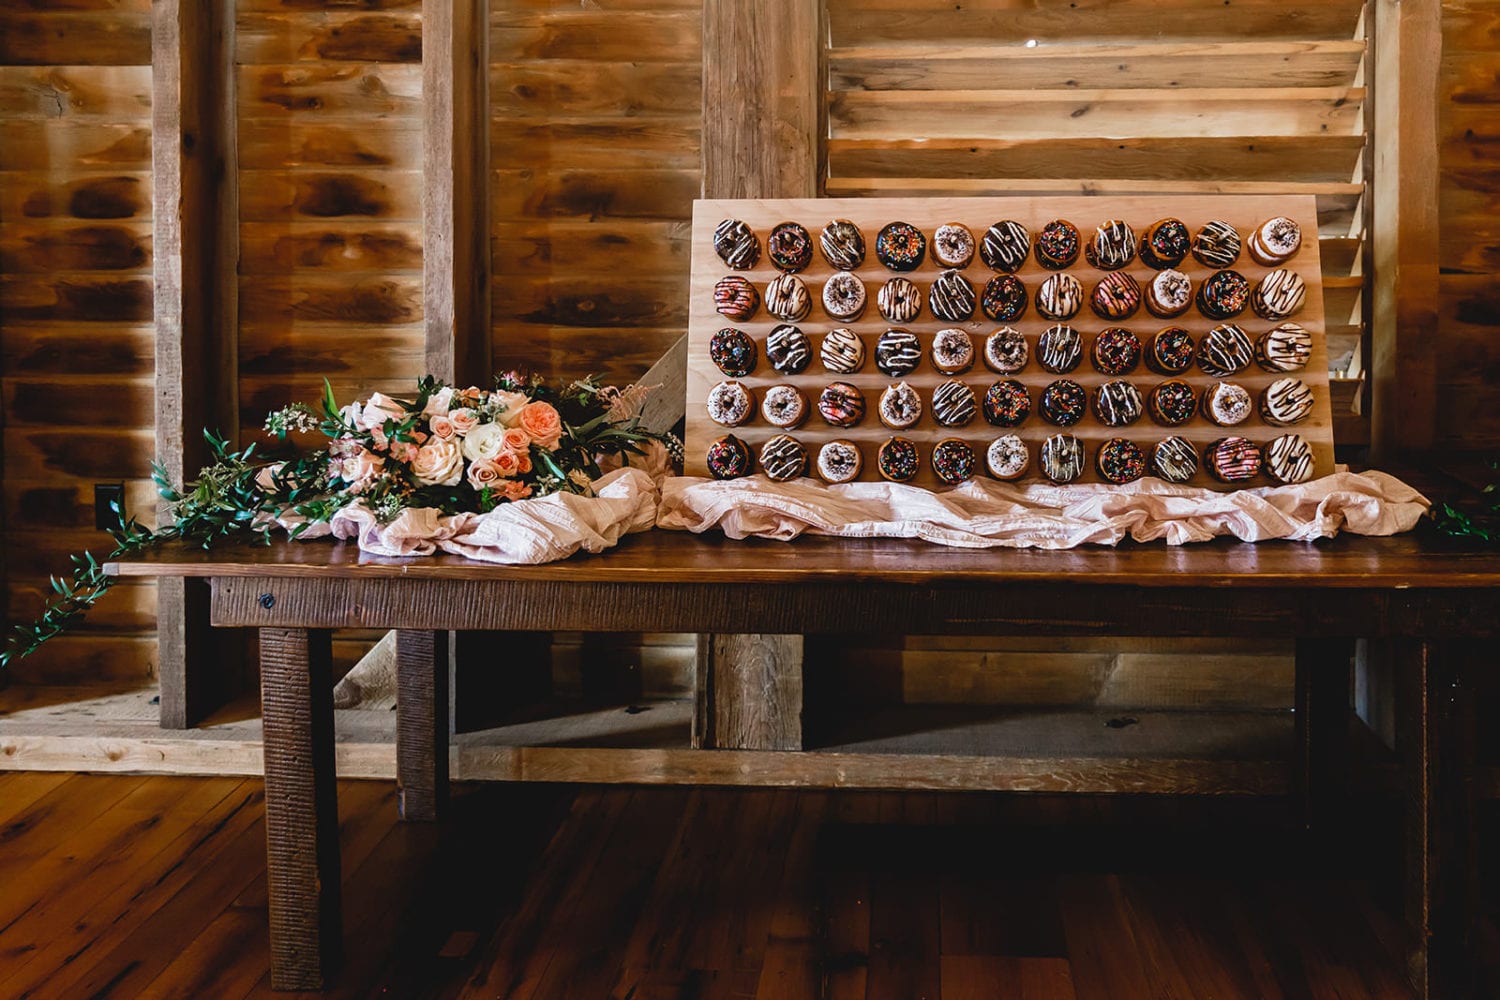 Wedding donuts and treats from a baker local to Lancaster County PA